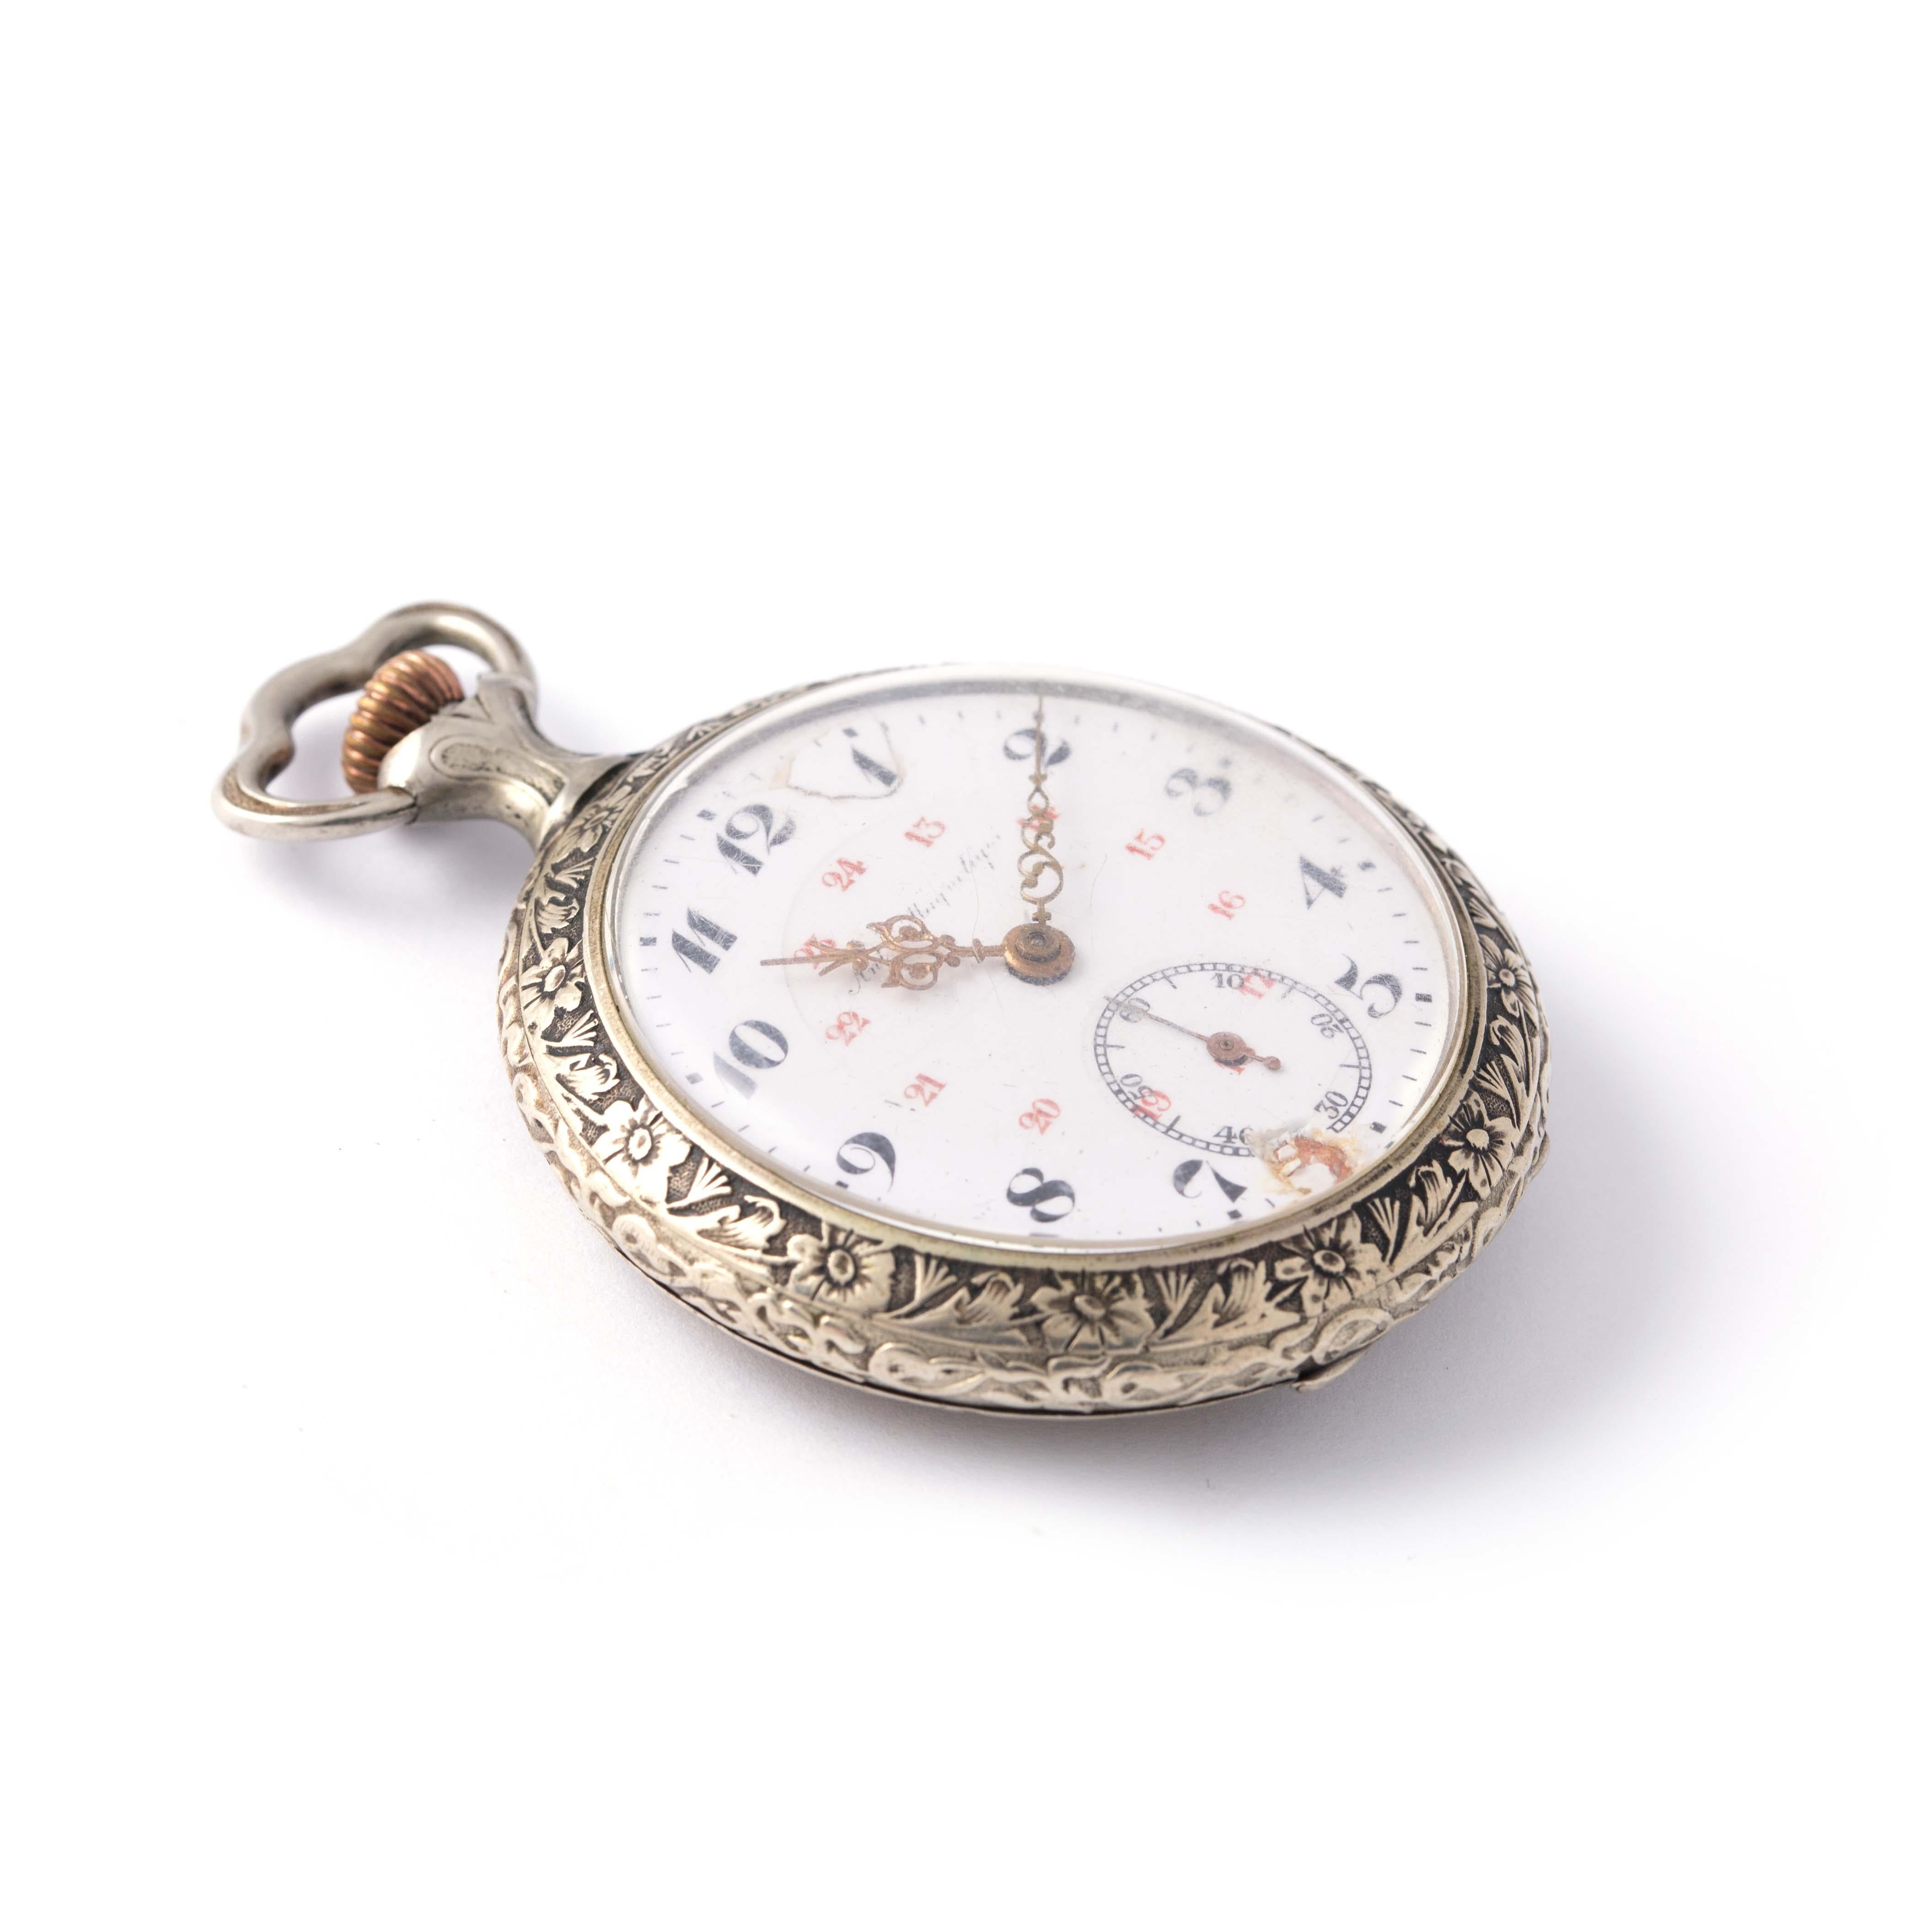 Silver pocket watch.
Height: 7.00 centimeters. 
Gross weight: 94.41 grams.

We do not guarantee the functioning of this watch.
